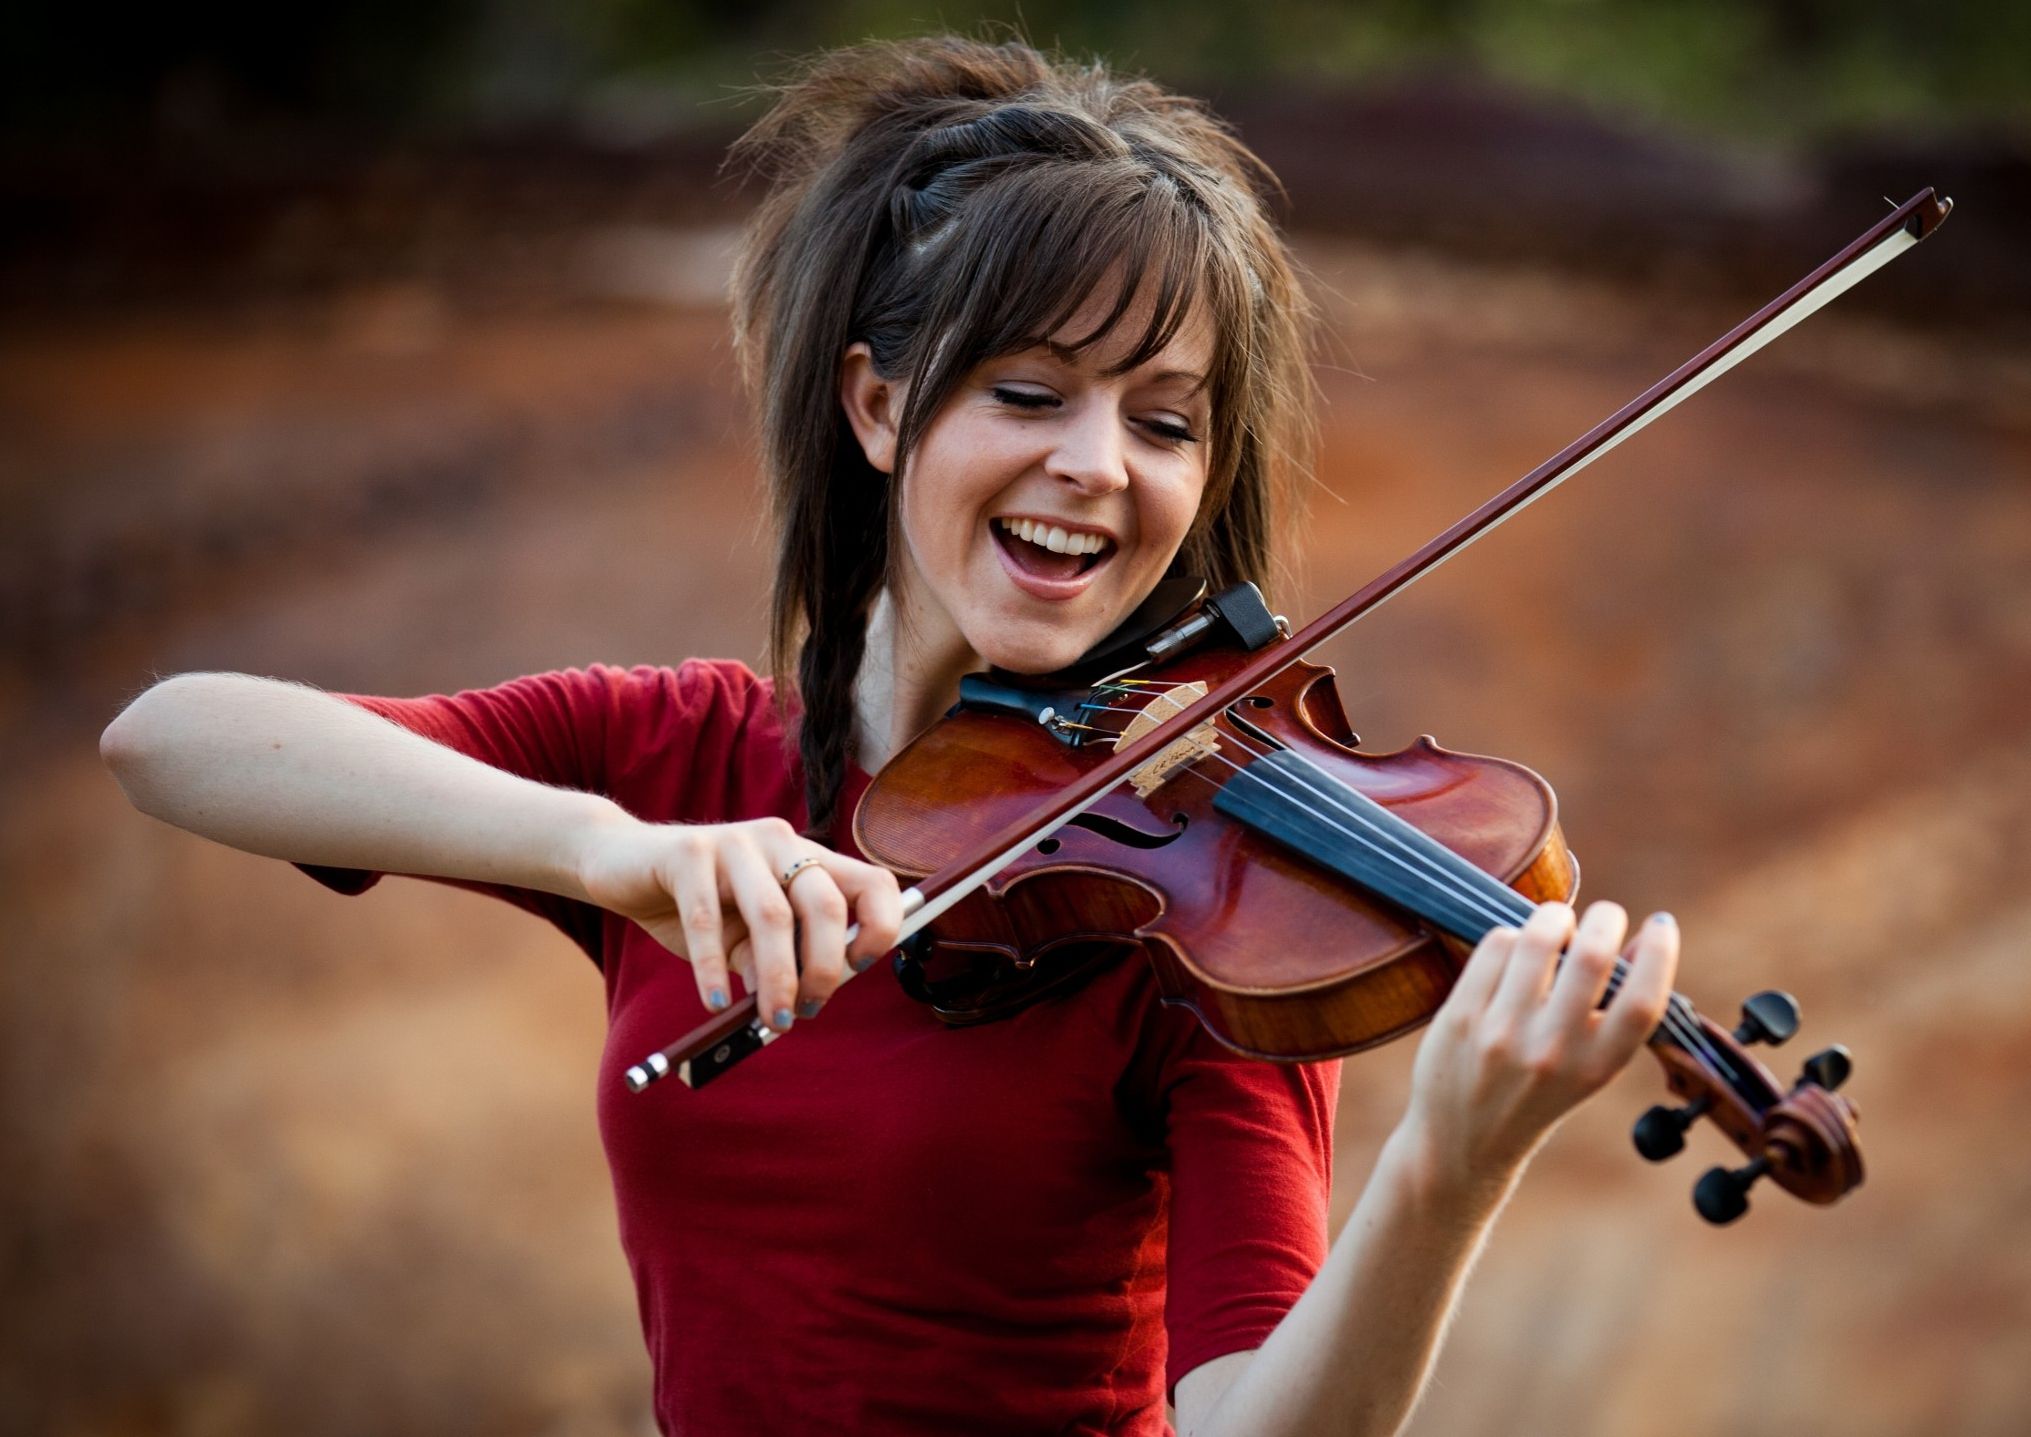 Lindsey Stirling | Weird facts, Lindsey stirling, Mind blowing facts